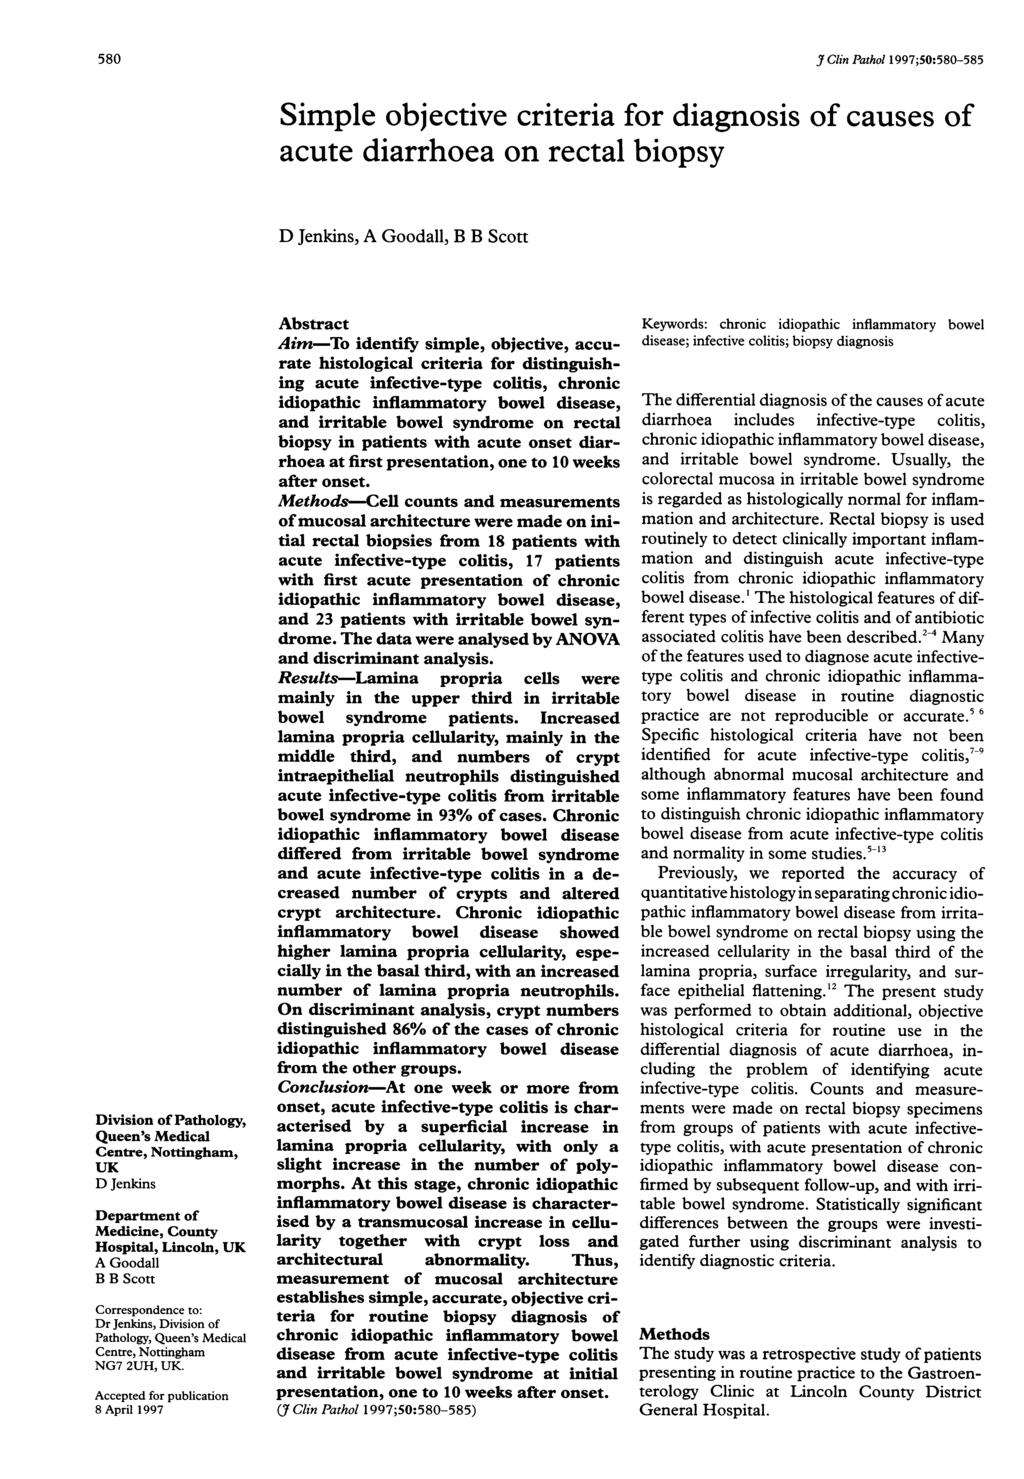 5808 JClin Pathol 1997;50:580-585 Simple objective criteria for diagnosis of causes of acute diarrhoea on rectal biopsy Division of Pathology, Queen's Medical Centre, Nottingham, UK D Jenkins